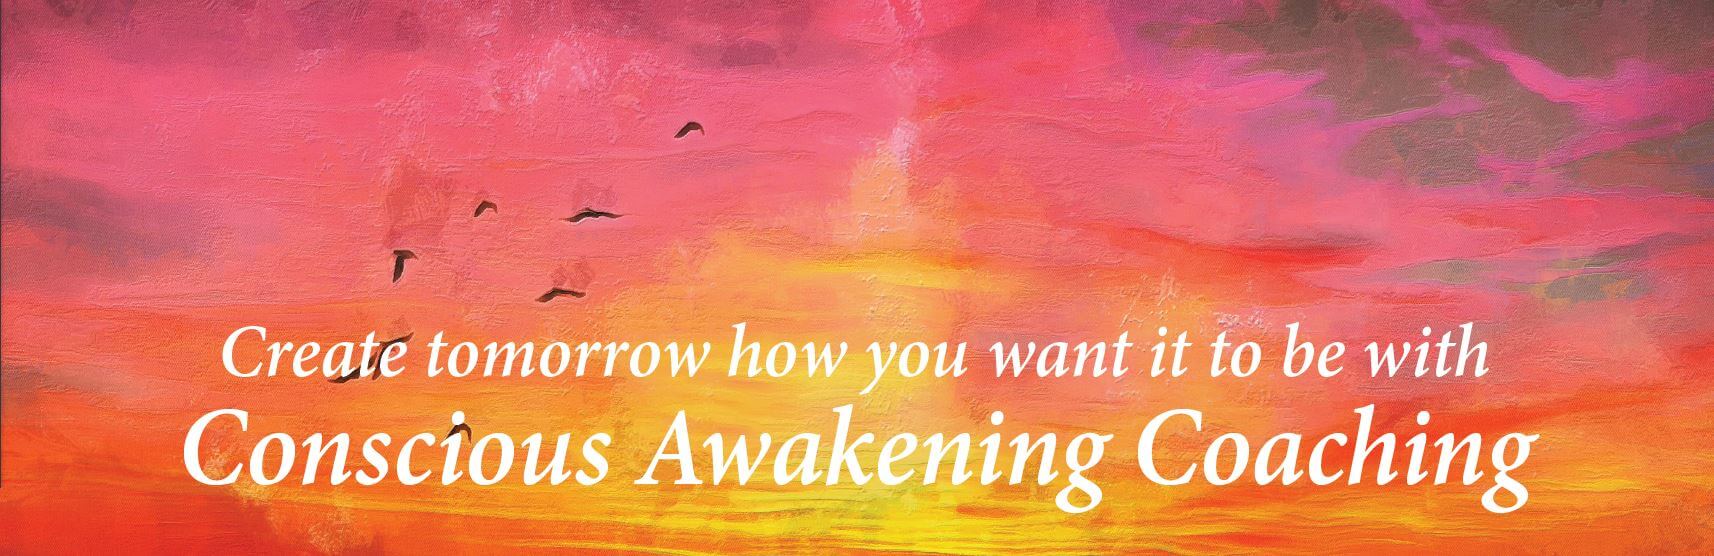 Create tomorrow how you want it to be with  Conscious Awakening Coaching